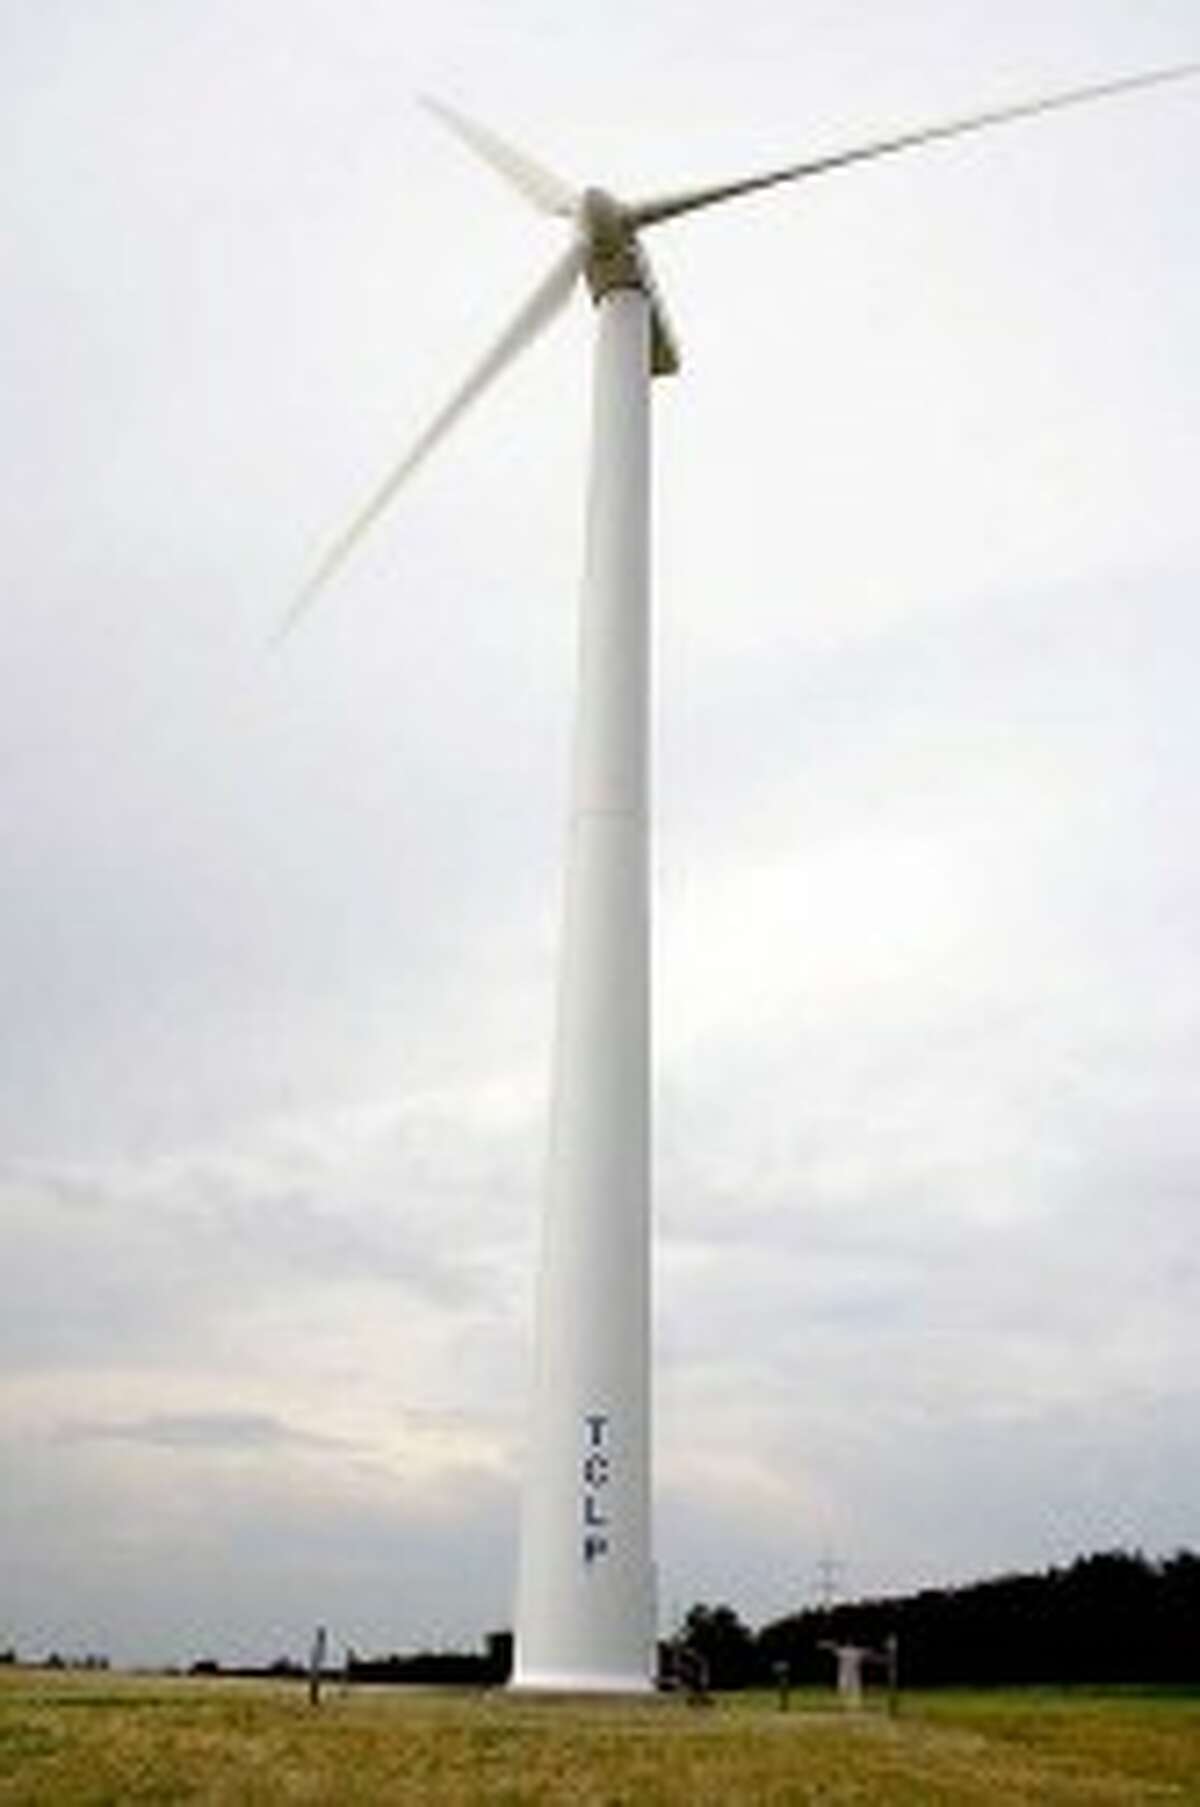 Michigan’s first wind turbine was erected in Traverse City in 1996. (Courtesy photo)